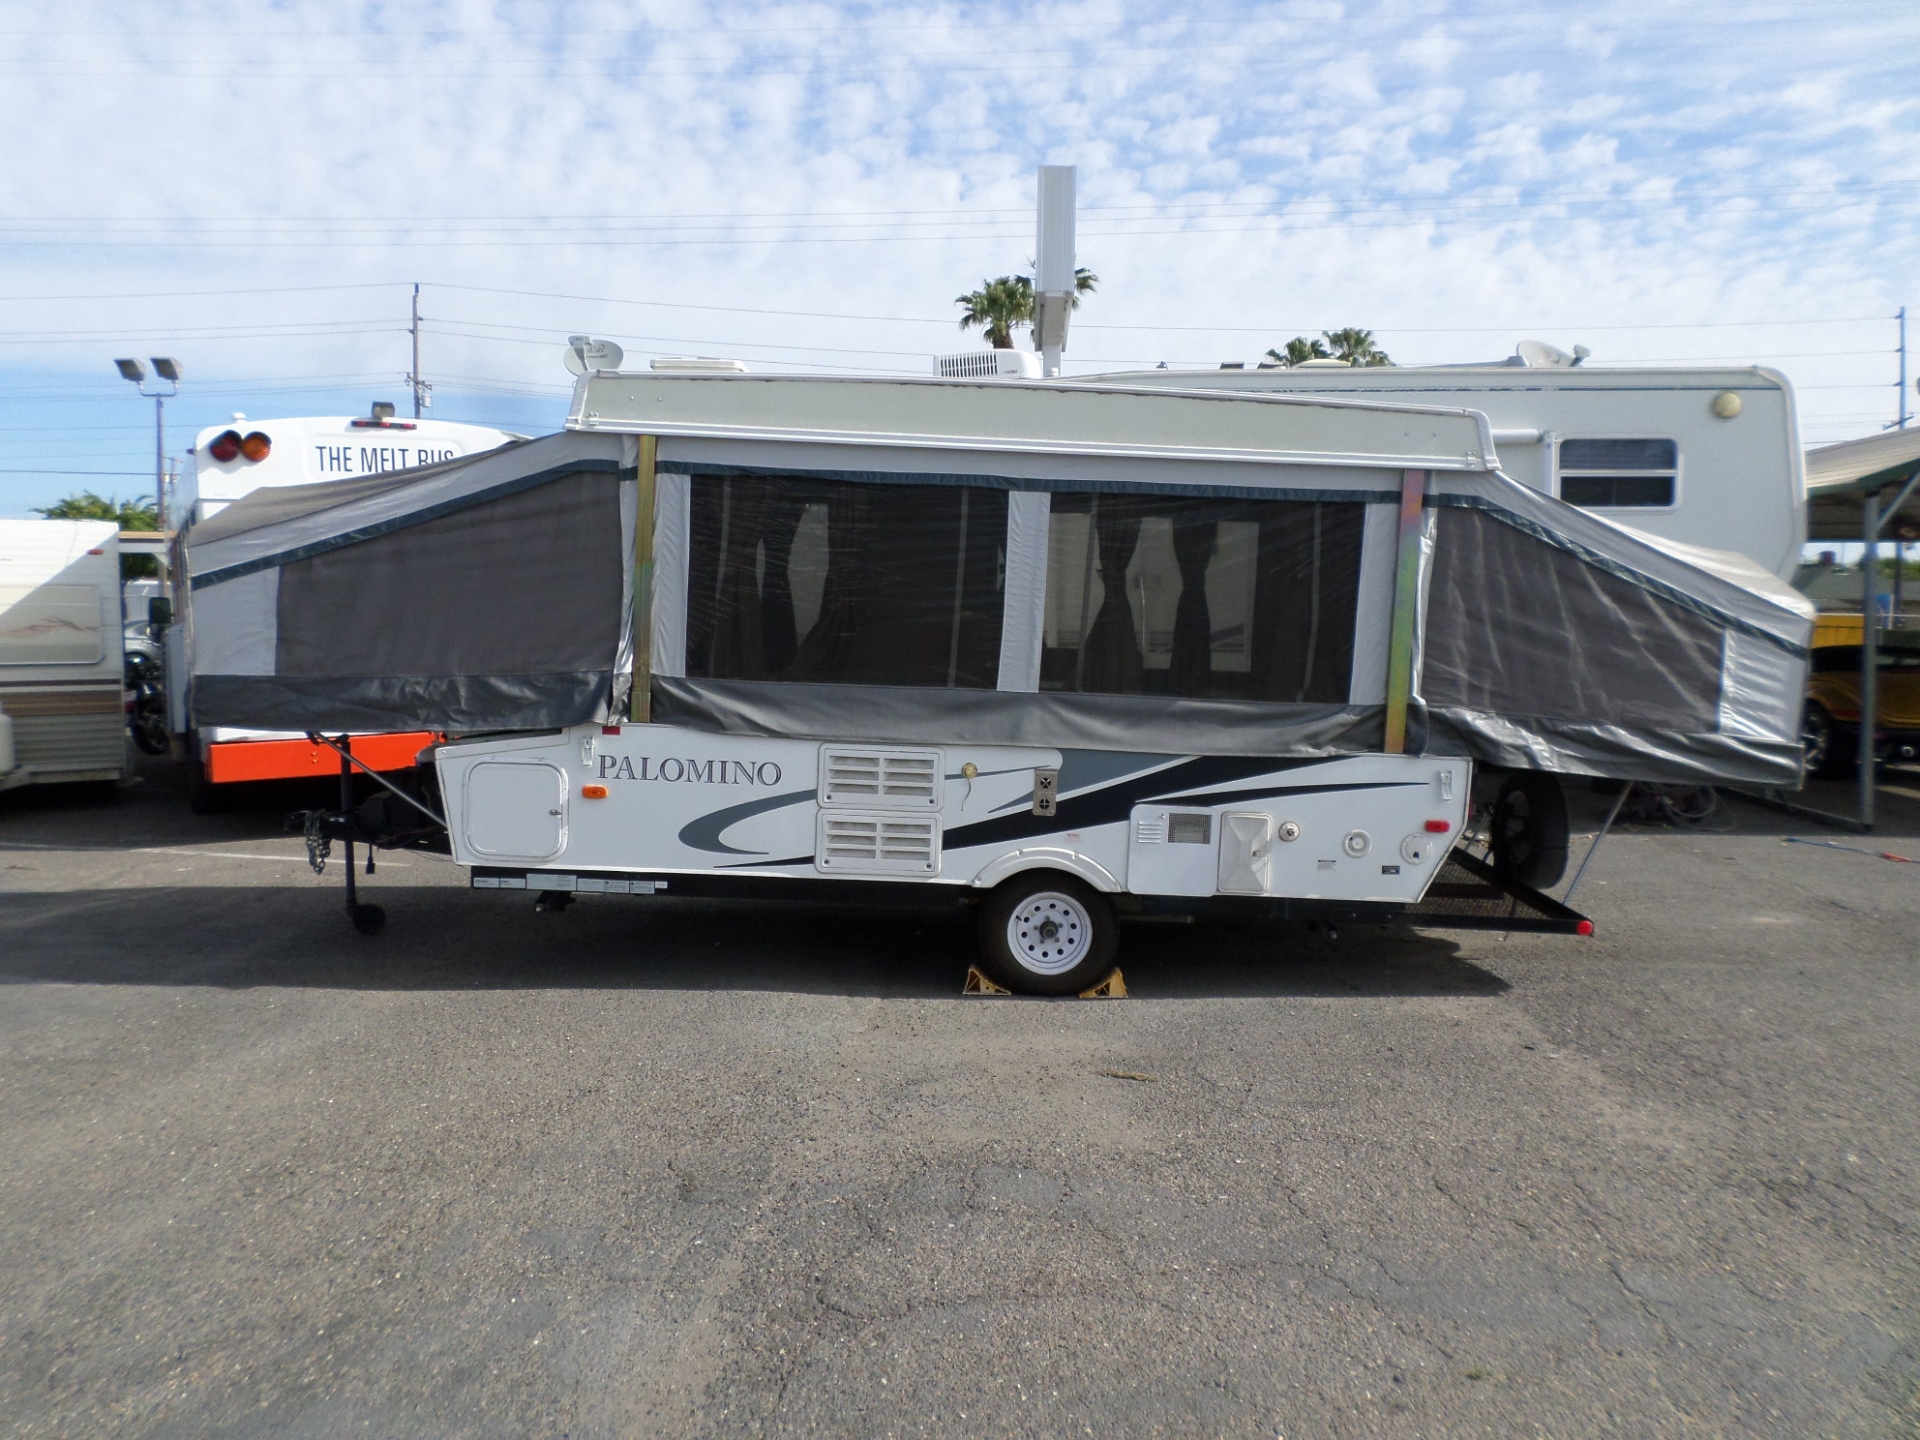 RV for sale: 2012 Forest River Palomino 4123 Tent Trailer Popup 23' in 2012 Palomino Pop Up Camper For Sale